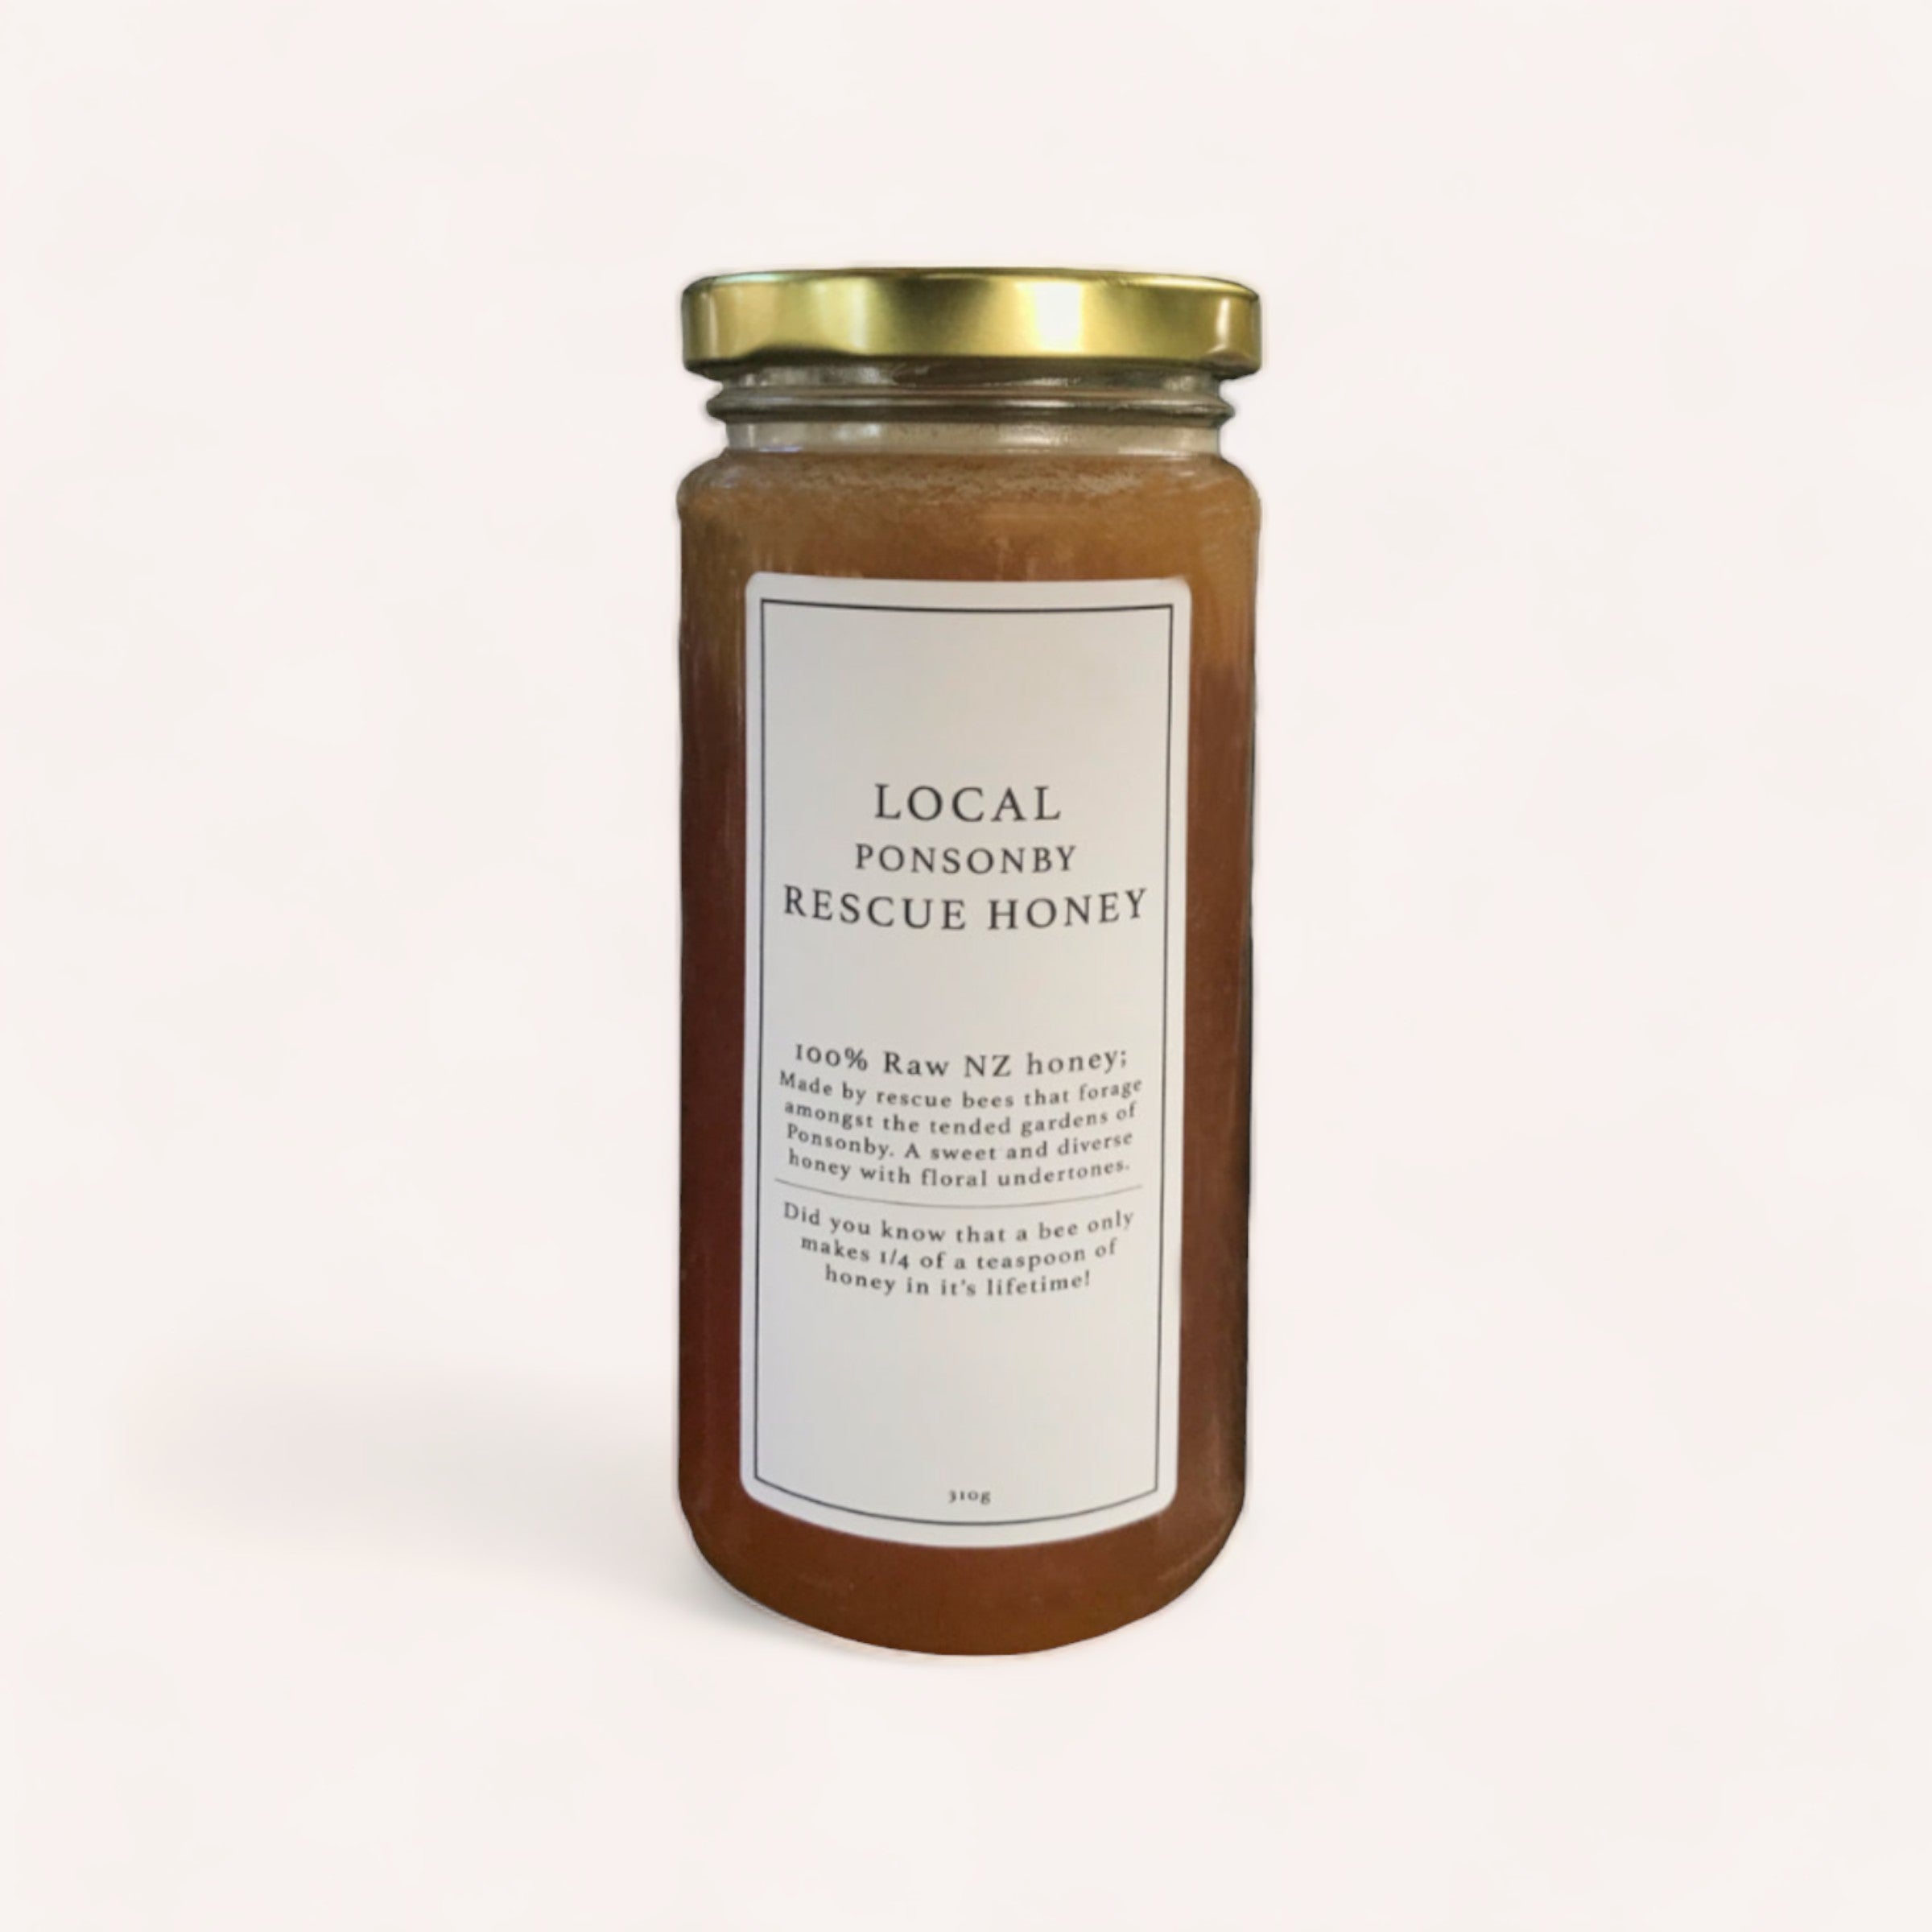 A jar of "Ponsonby Rescue Honey by Bees Up Top," labeled as 100% raw natural honey, against a clean, white background.